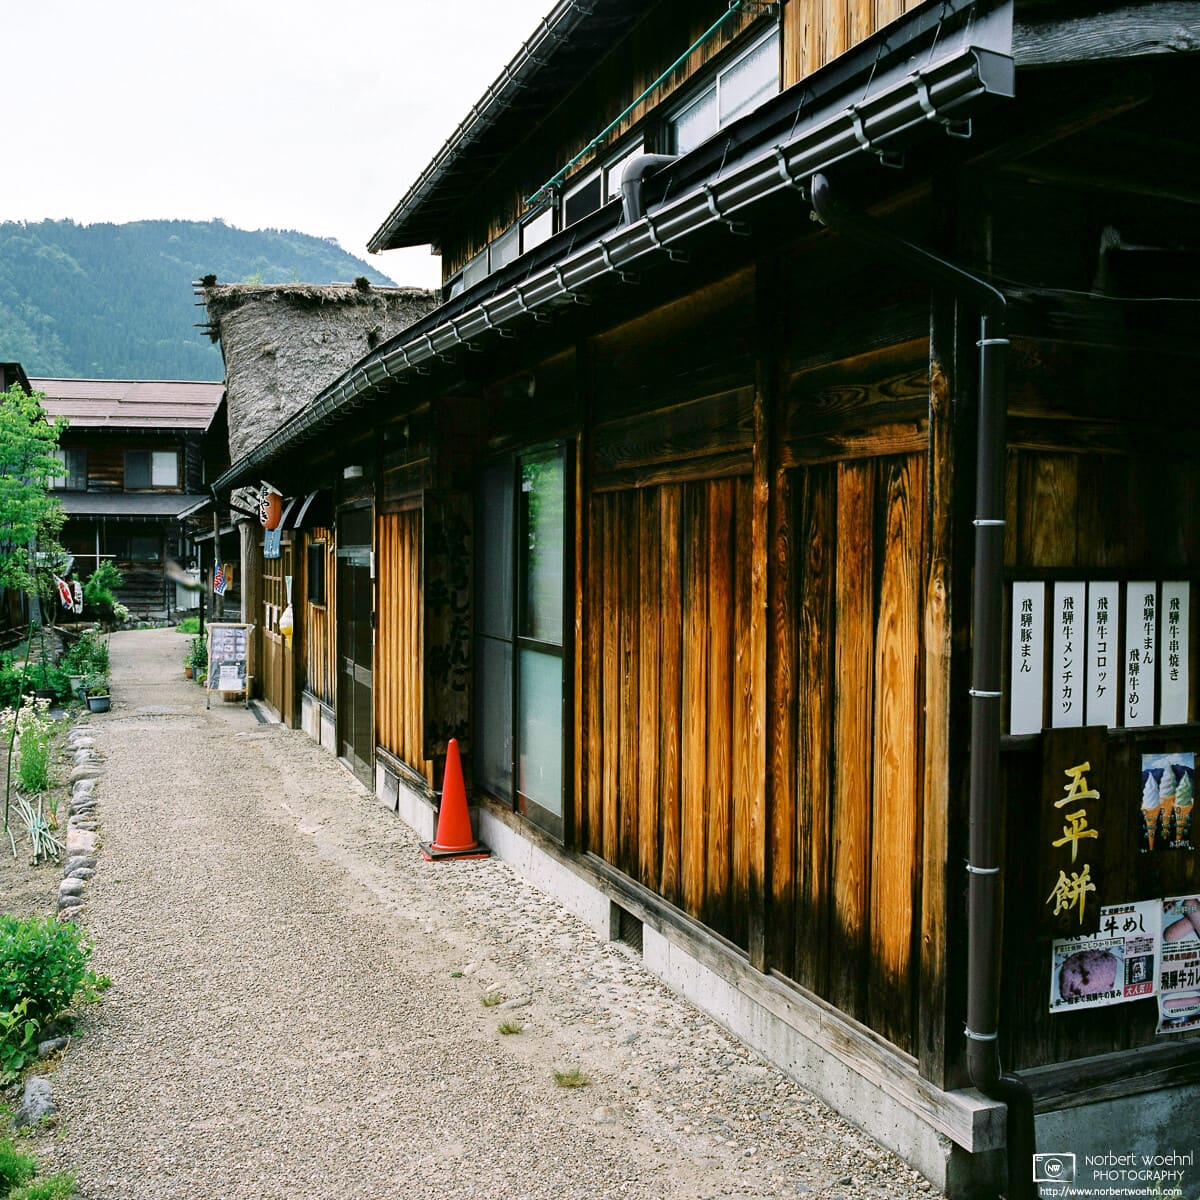 View along a line of eateries in the historic Ogimachi Village of Shirakawago in Gifu Prefecture, Japan.